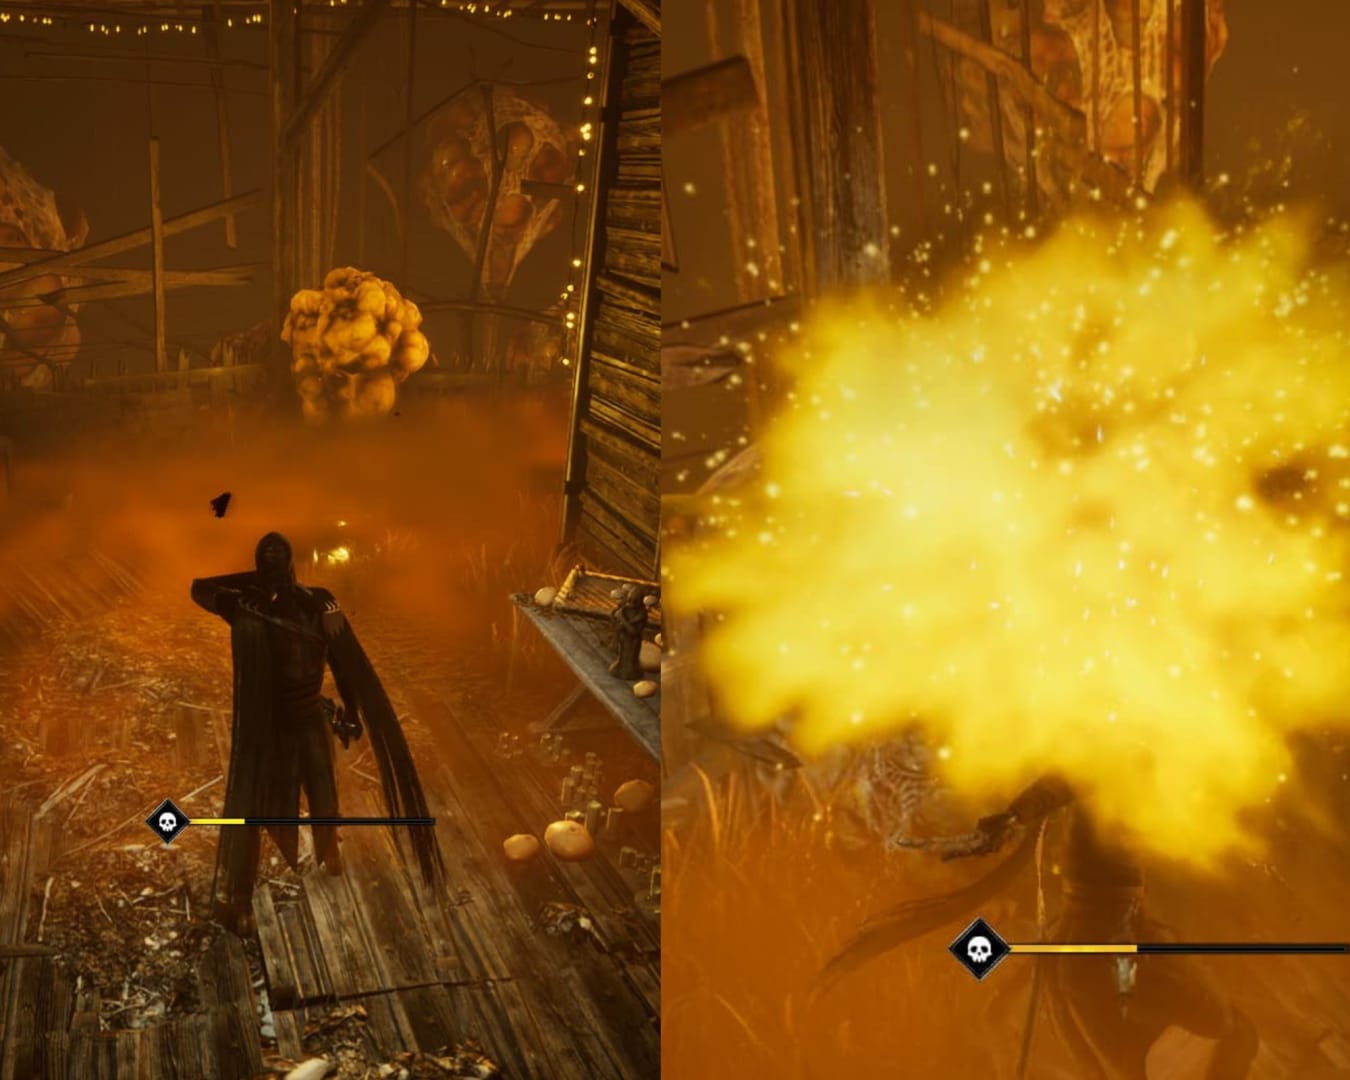 Screenshot of both the toxic smoke and defeating the toxic sac in Thymesia, How to prepare for the first boss in Thymesia 